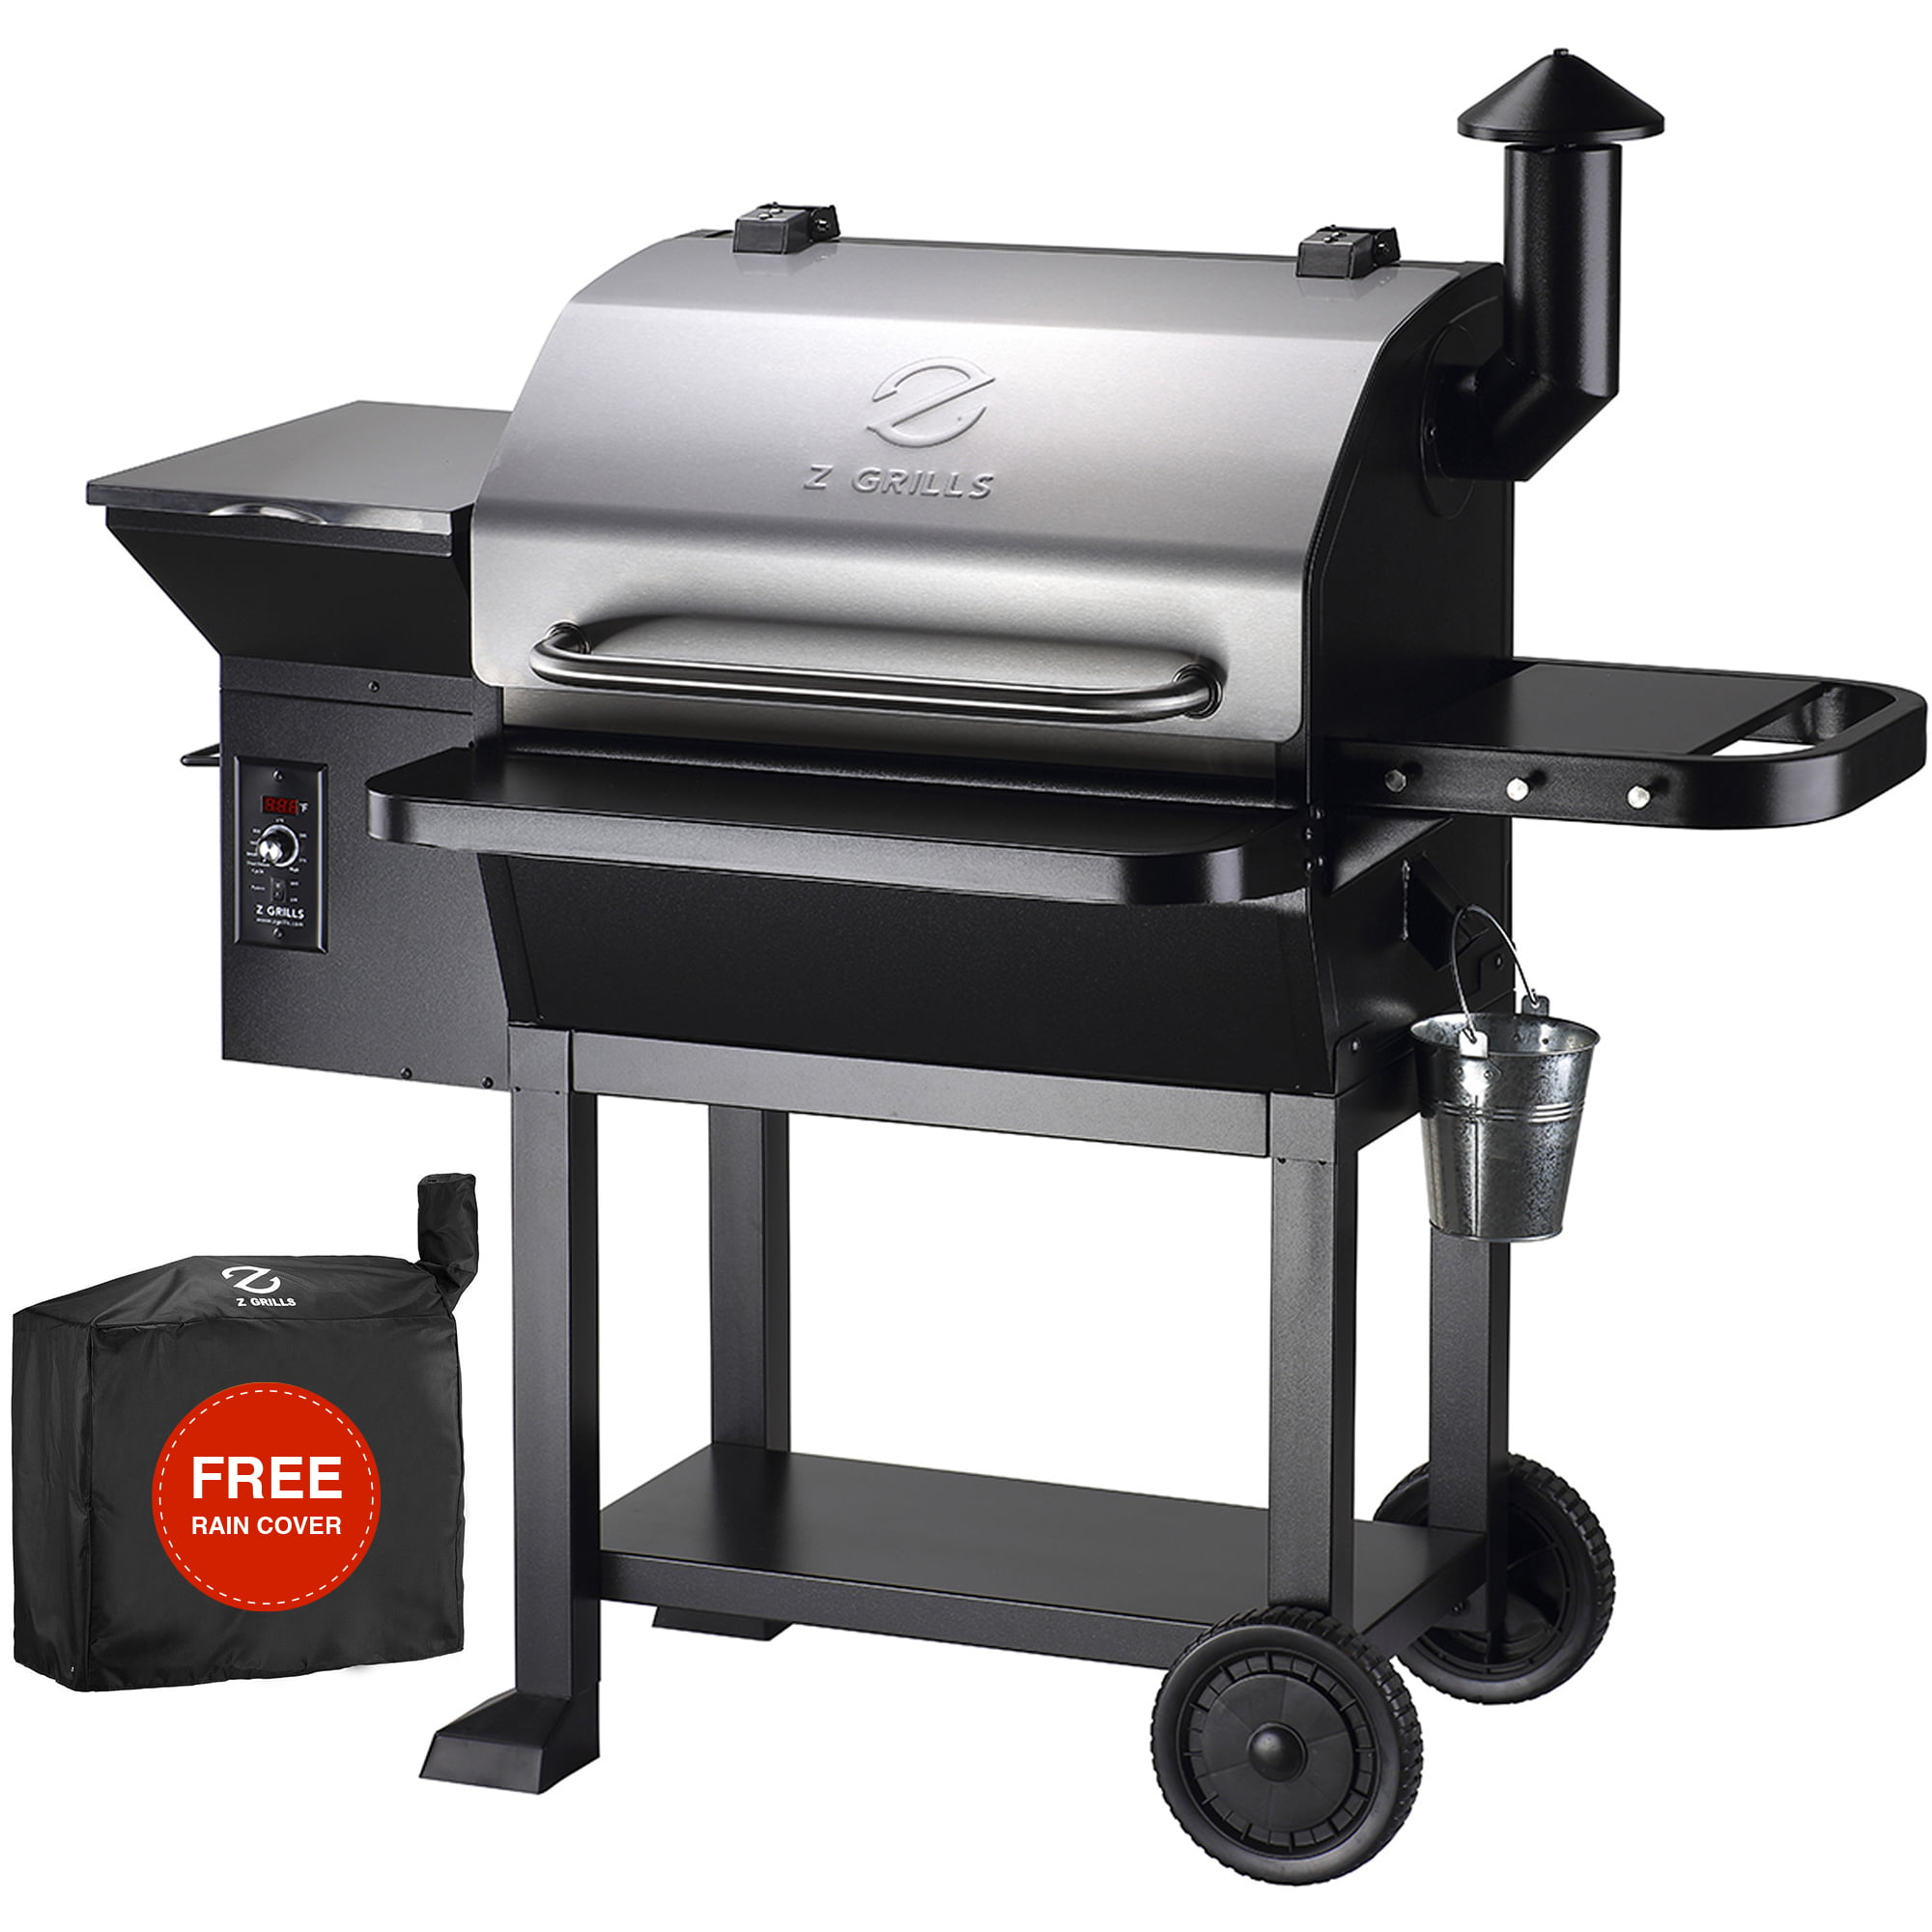 BBQ Grill Premium Heavy Duty Waterproof Cover Gas Electric Barbecue Grill Smoker